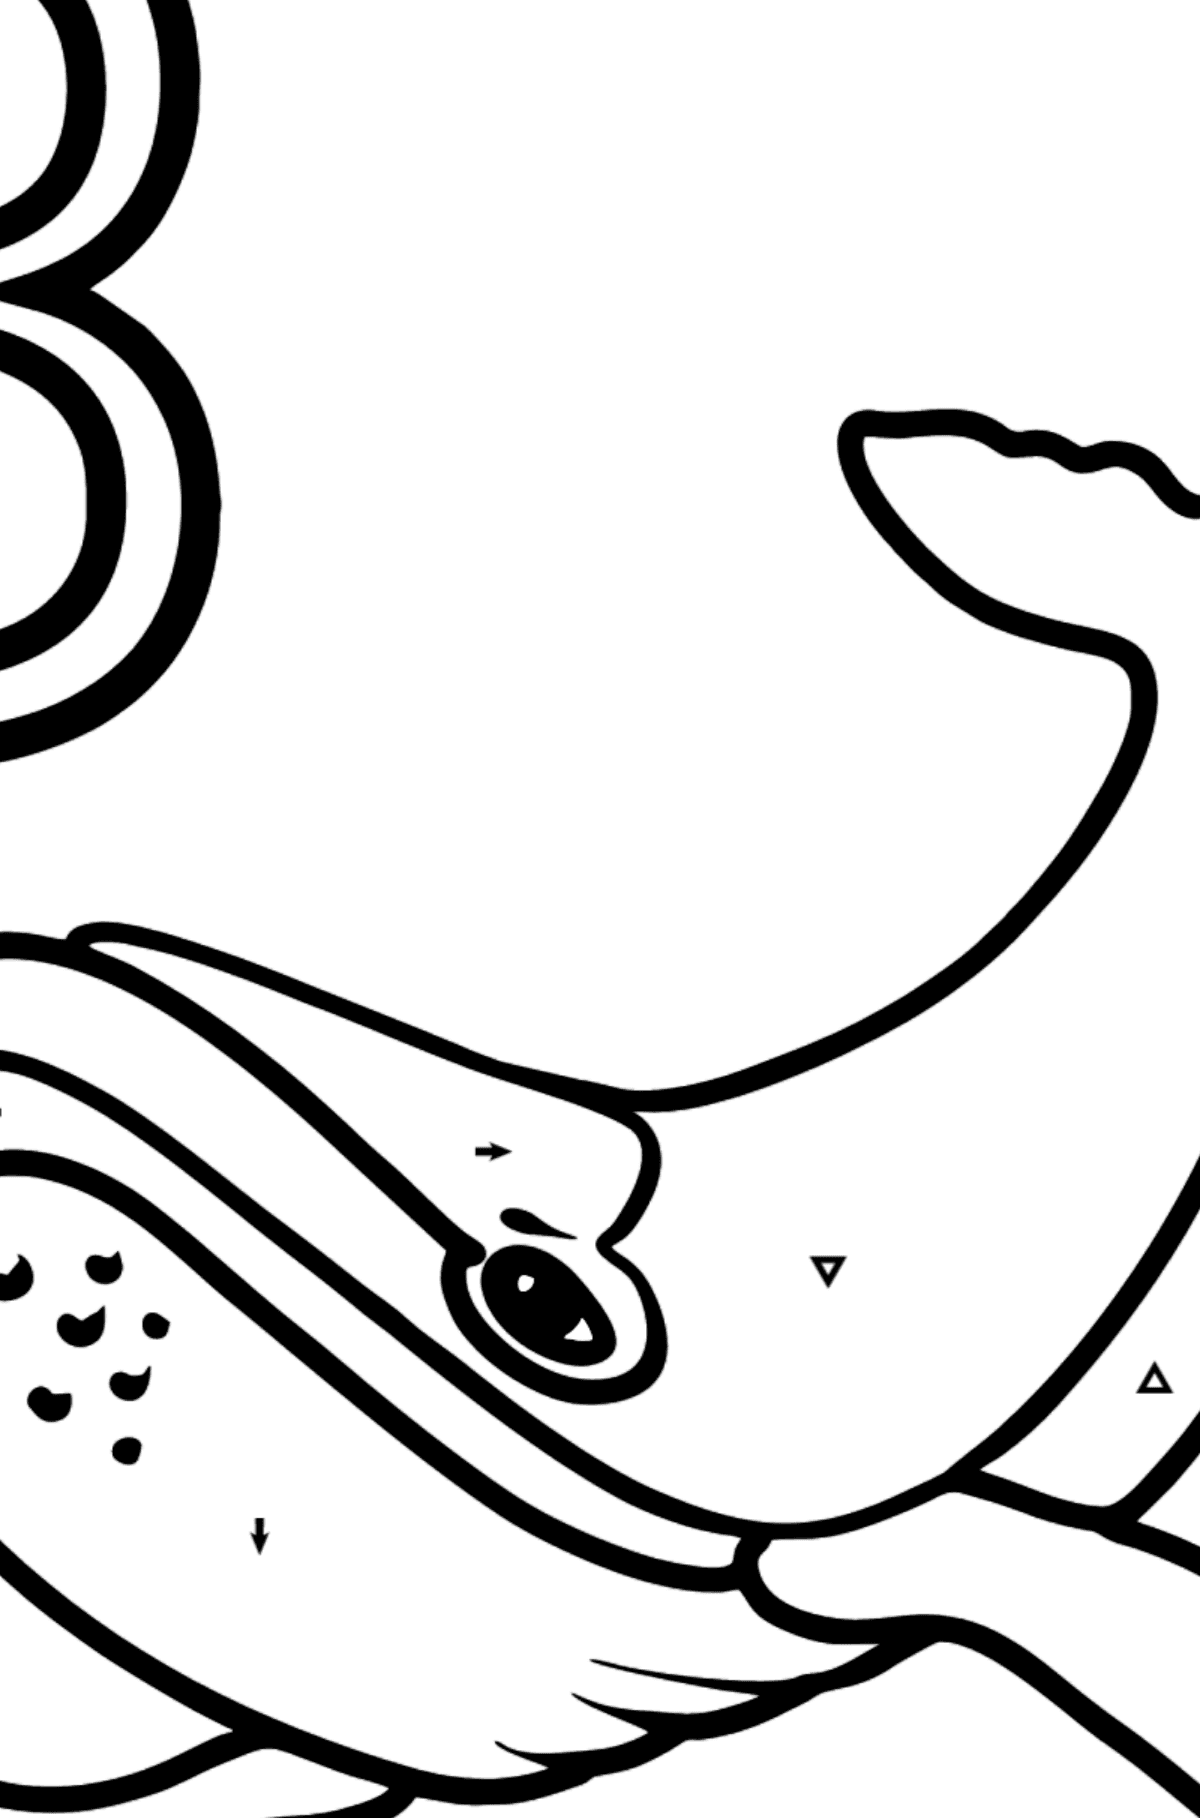 Spanish Letter B coloring pages - BALLENA - Coloring by Symbols for Kids